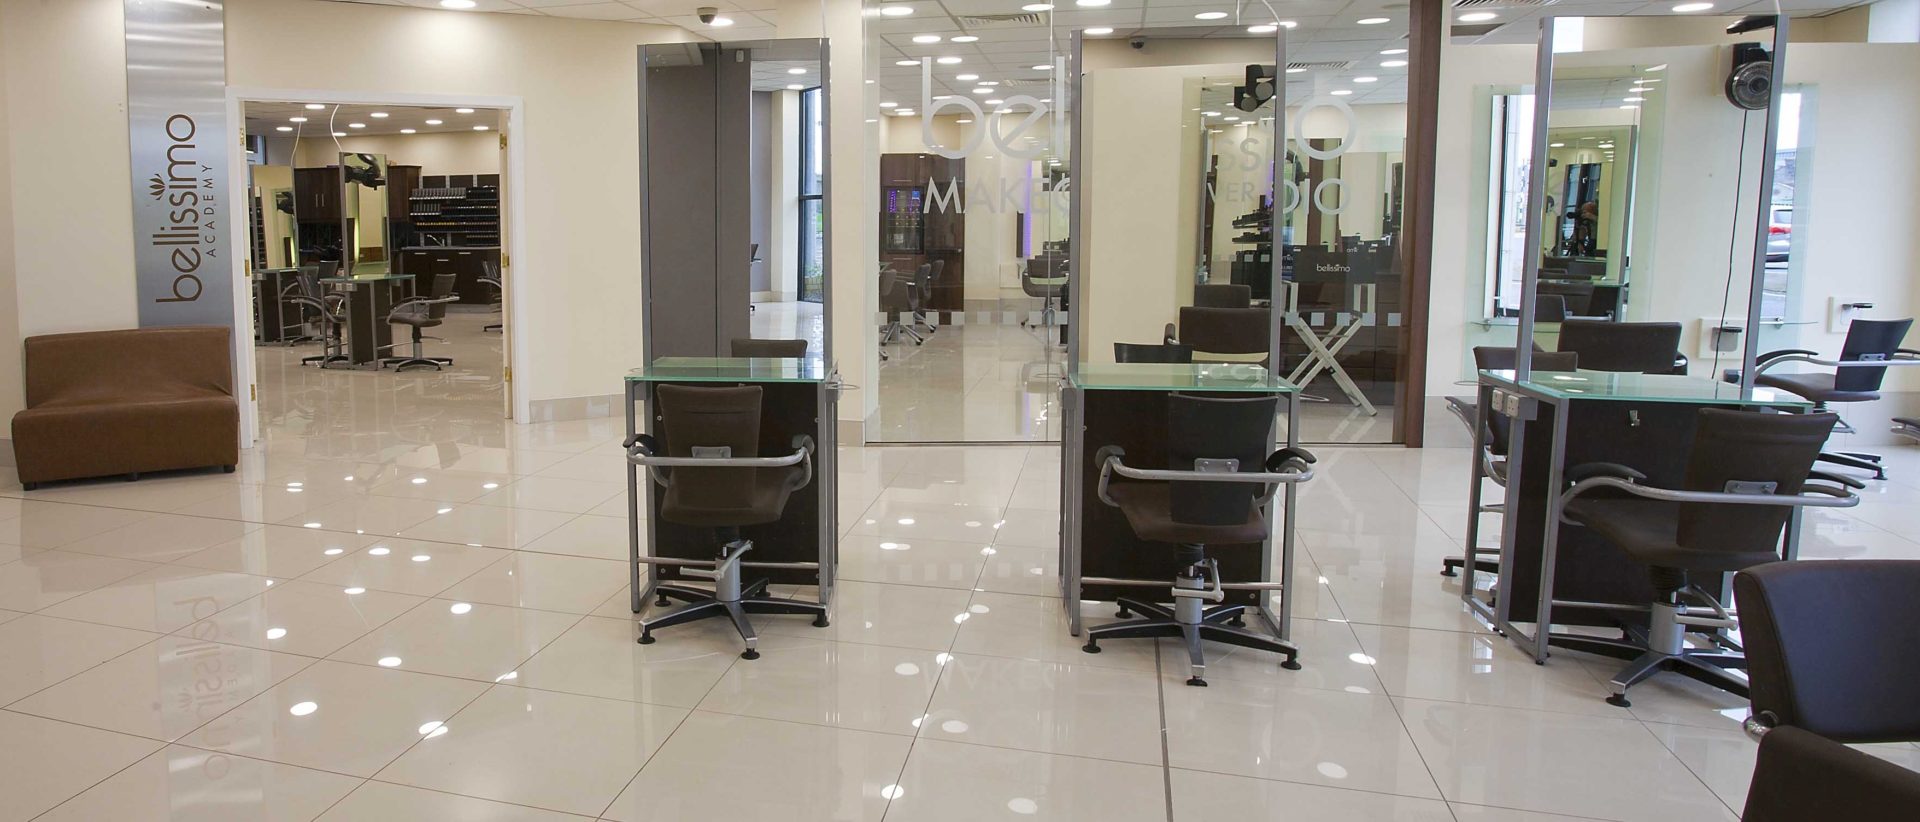 BELLISSIMO HAIRDRESSING ACADEMY IN LIMERICK